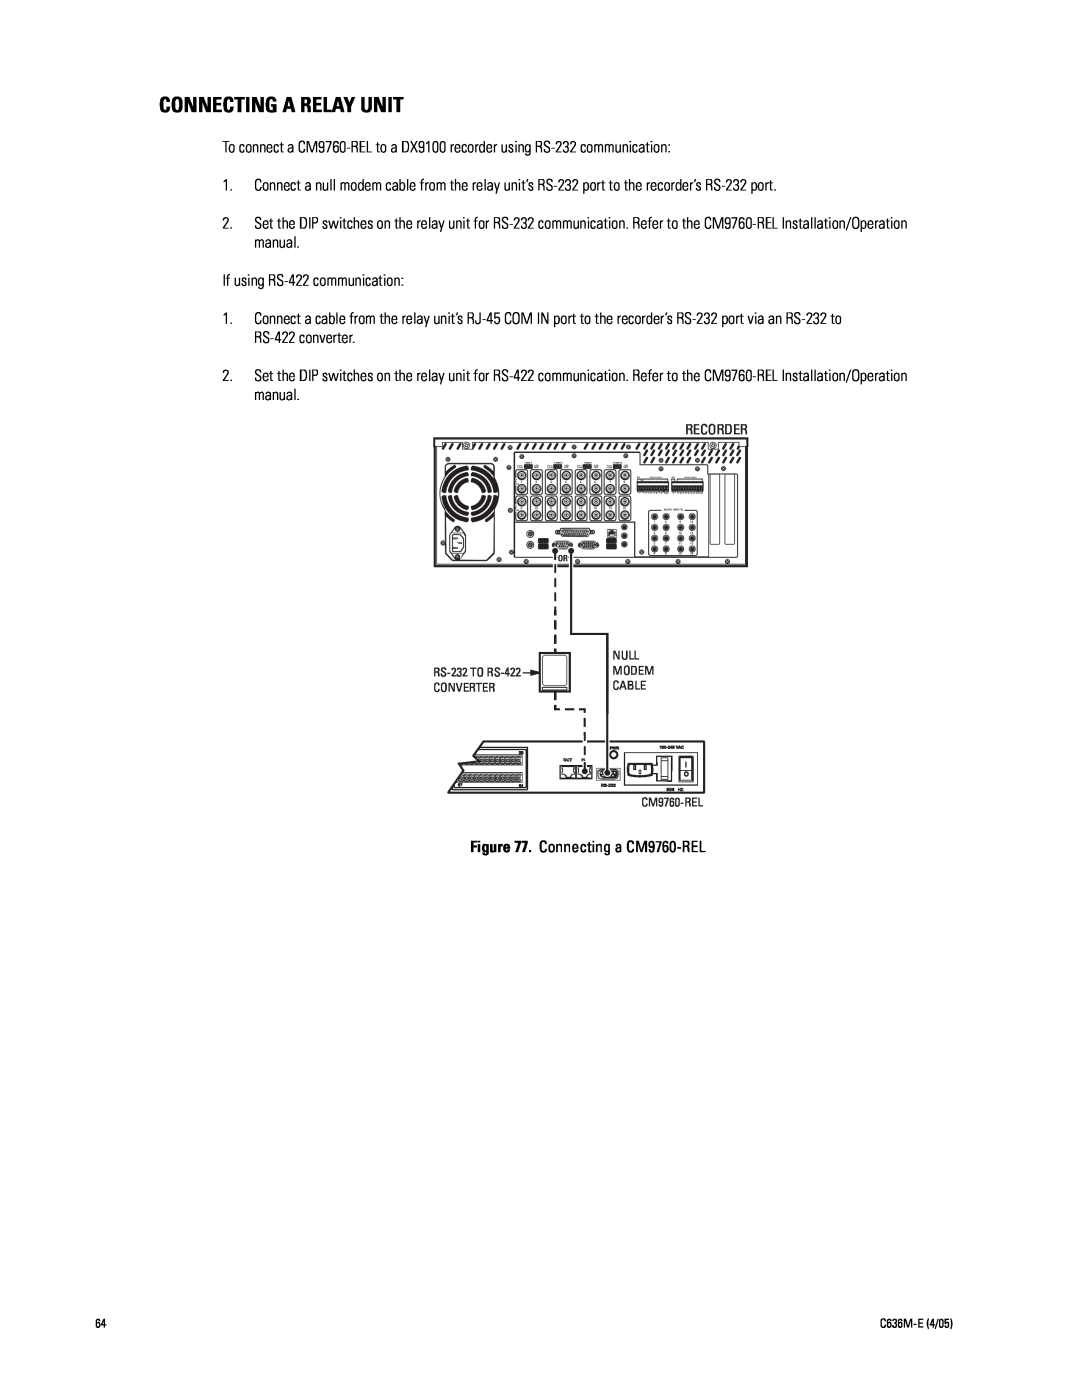 Pelco DX9100 installation manual Connecting A Relay Unit 